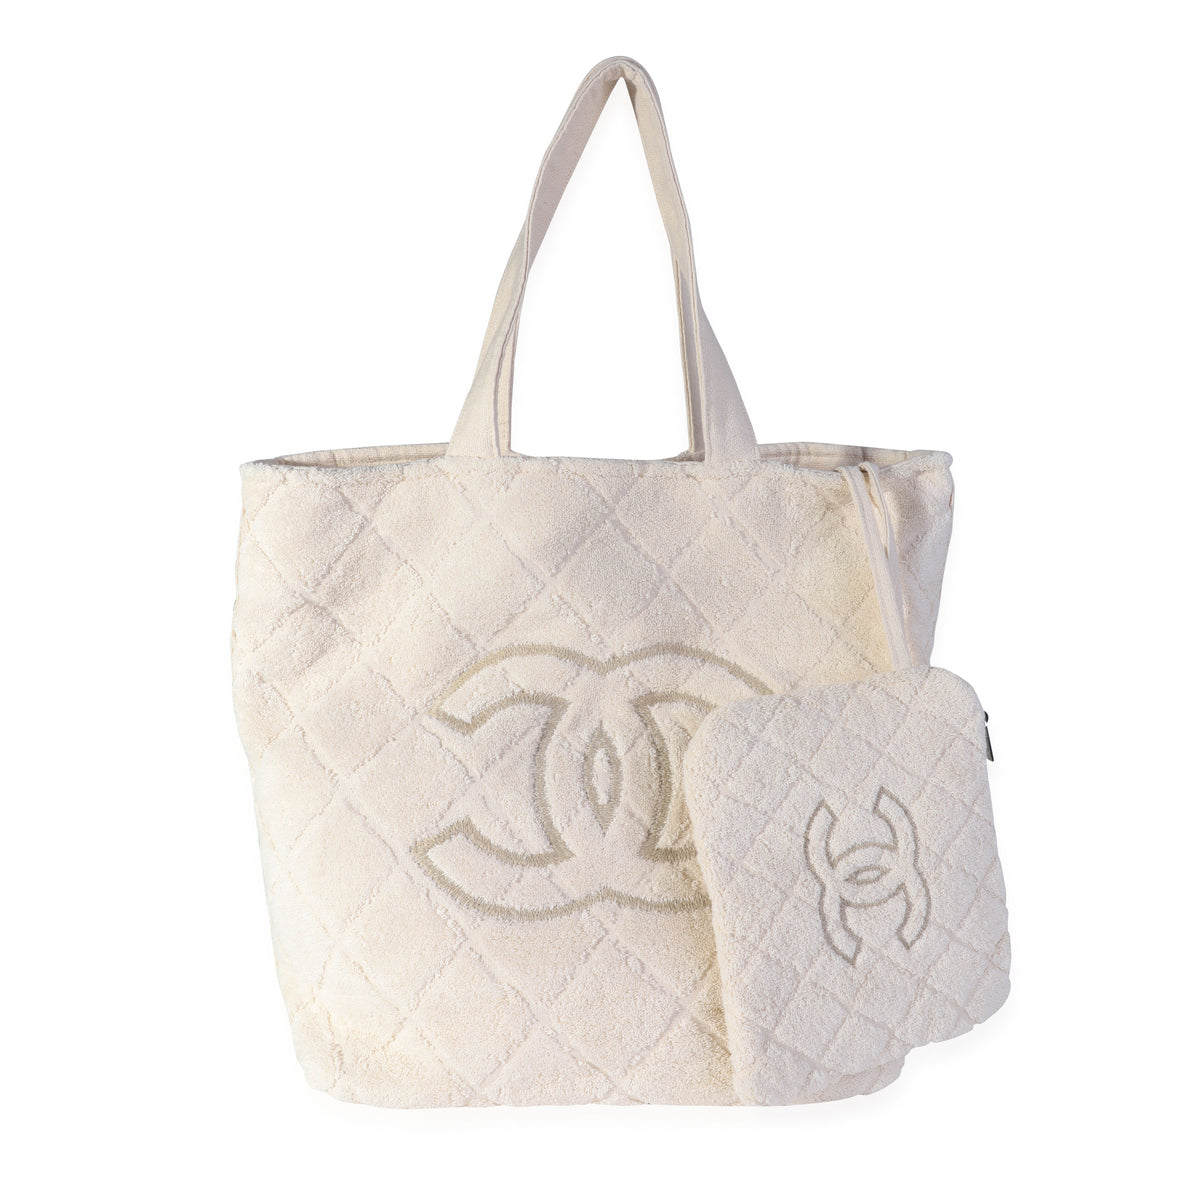 Chanel Cream Terry Beach Tote with Towel and Pouch, myGemma